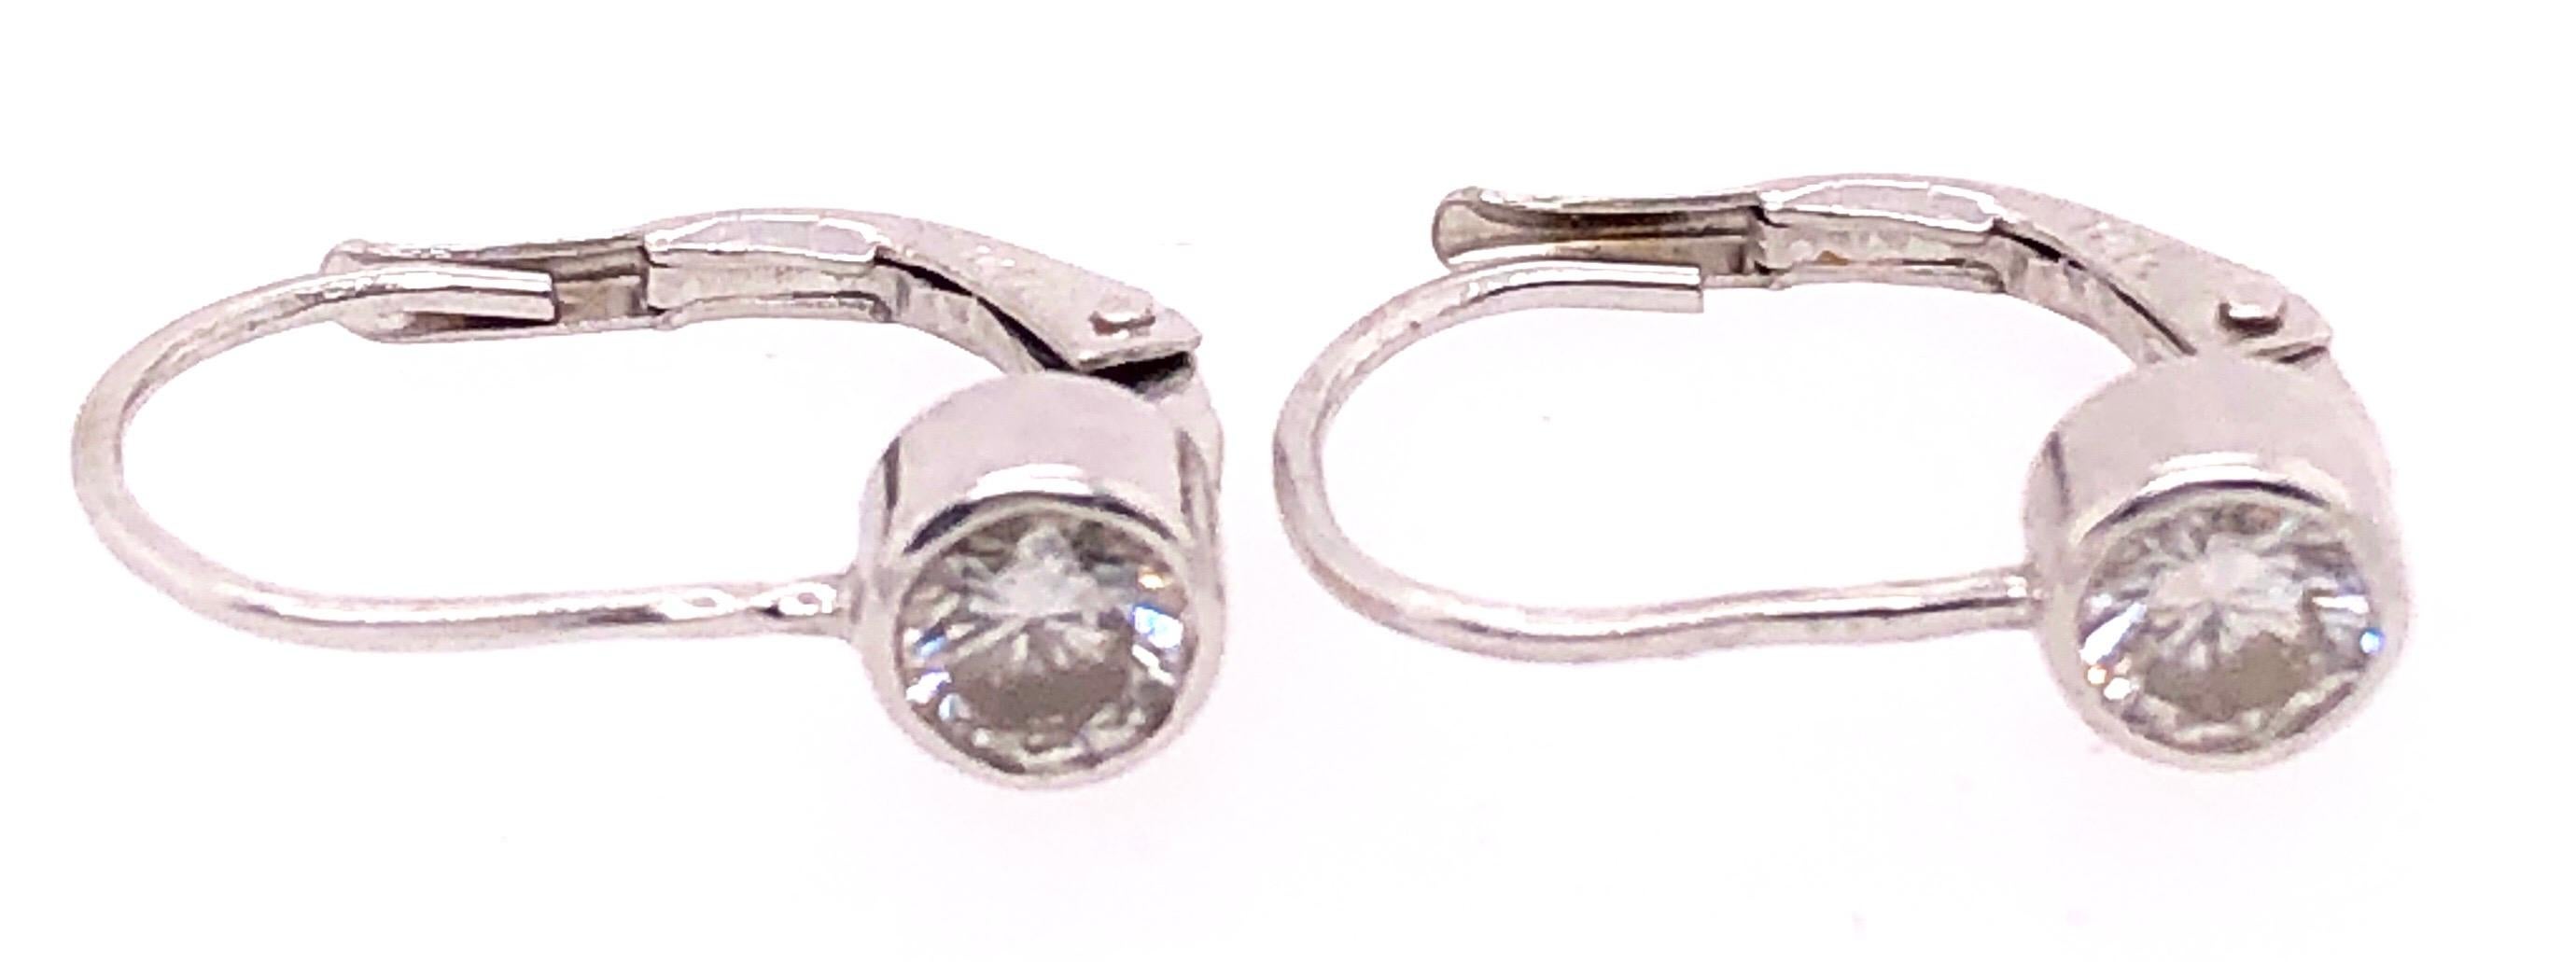 14 Karat White Gold Lever Back Diamond Earrings 0.80 TDW In Good Condition For Sale In Stamford, CT